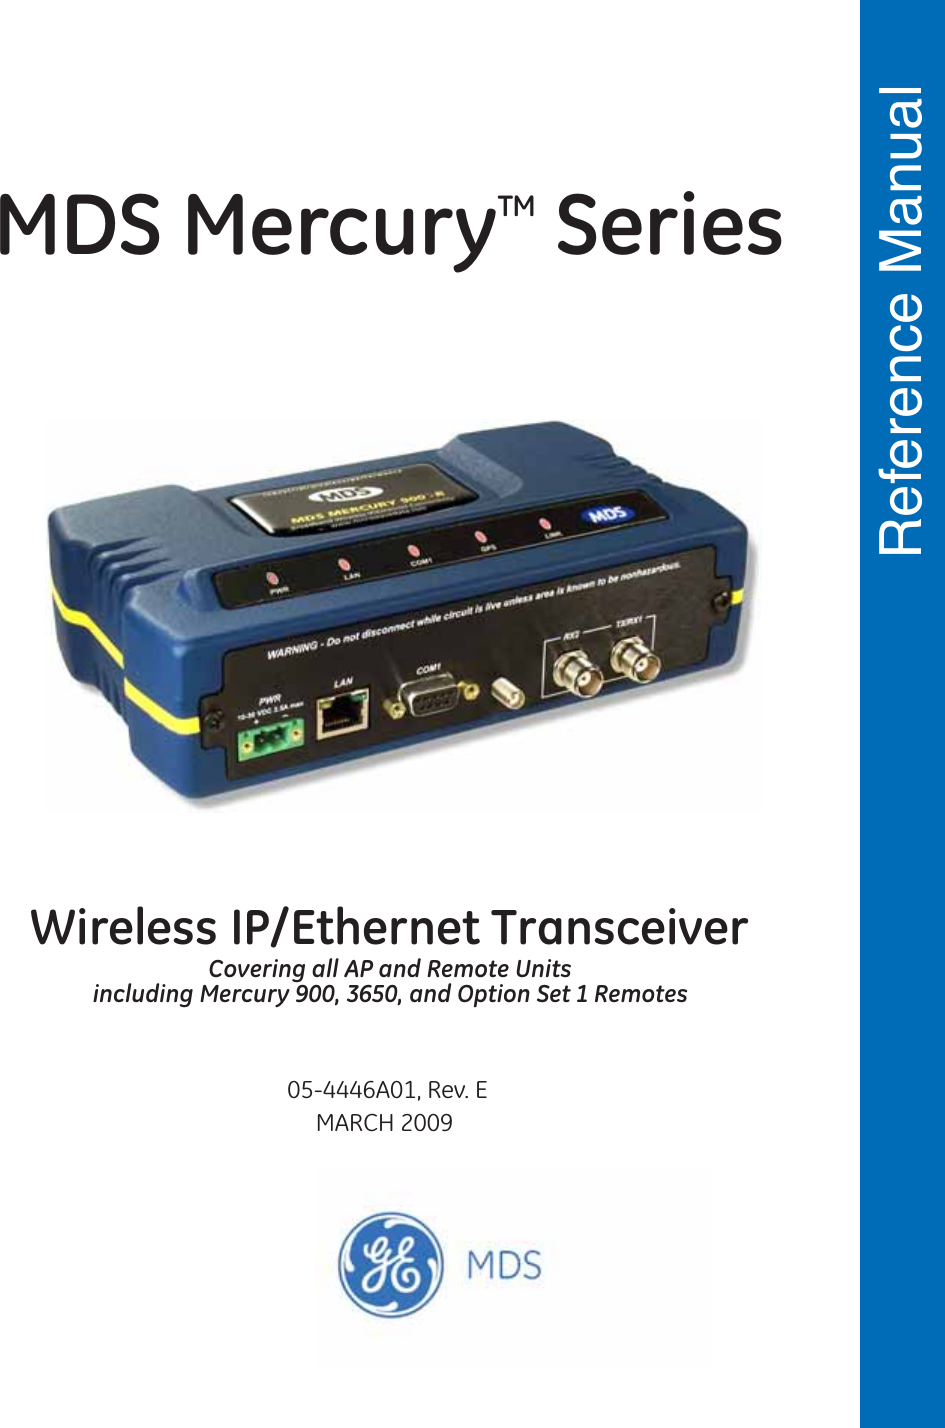  Reference Manual 05-4446A01, Rev. EMARCH 2009Wireless IP/Ethernet TransceiverCovering all AP and Remote Unitsincluding Mercury 900, 3650, and Option Set 1 RemotesMDS MercuryTM Series 